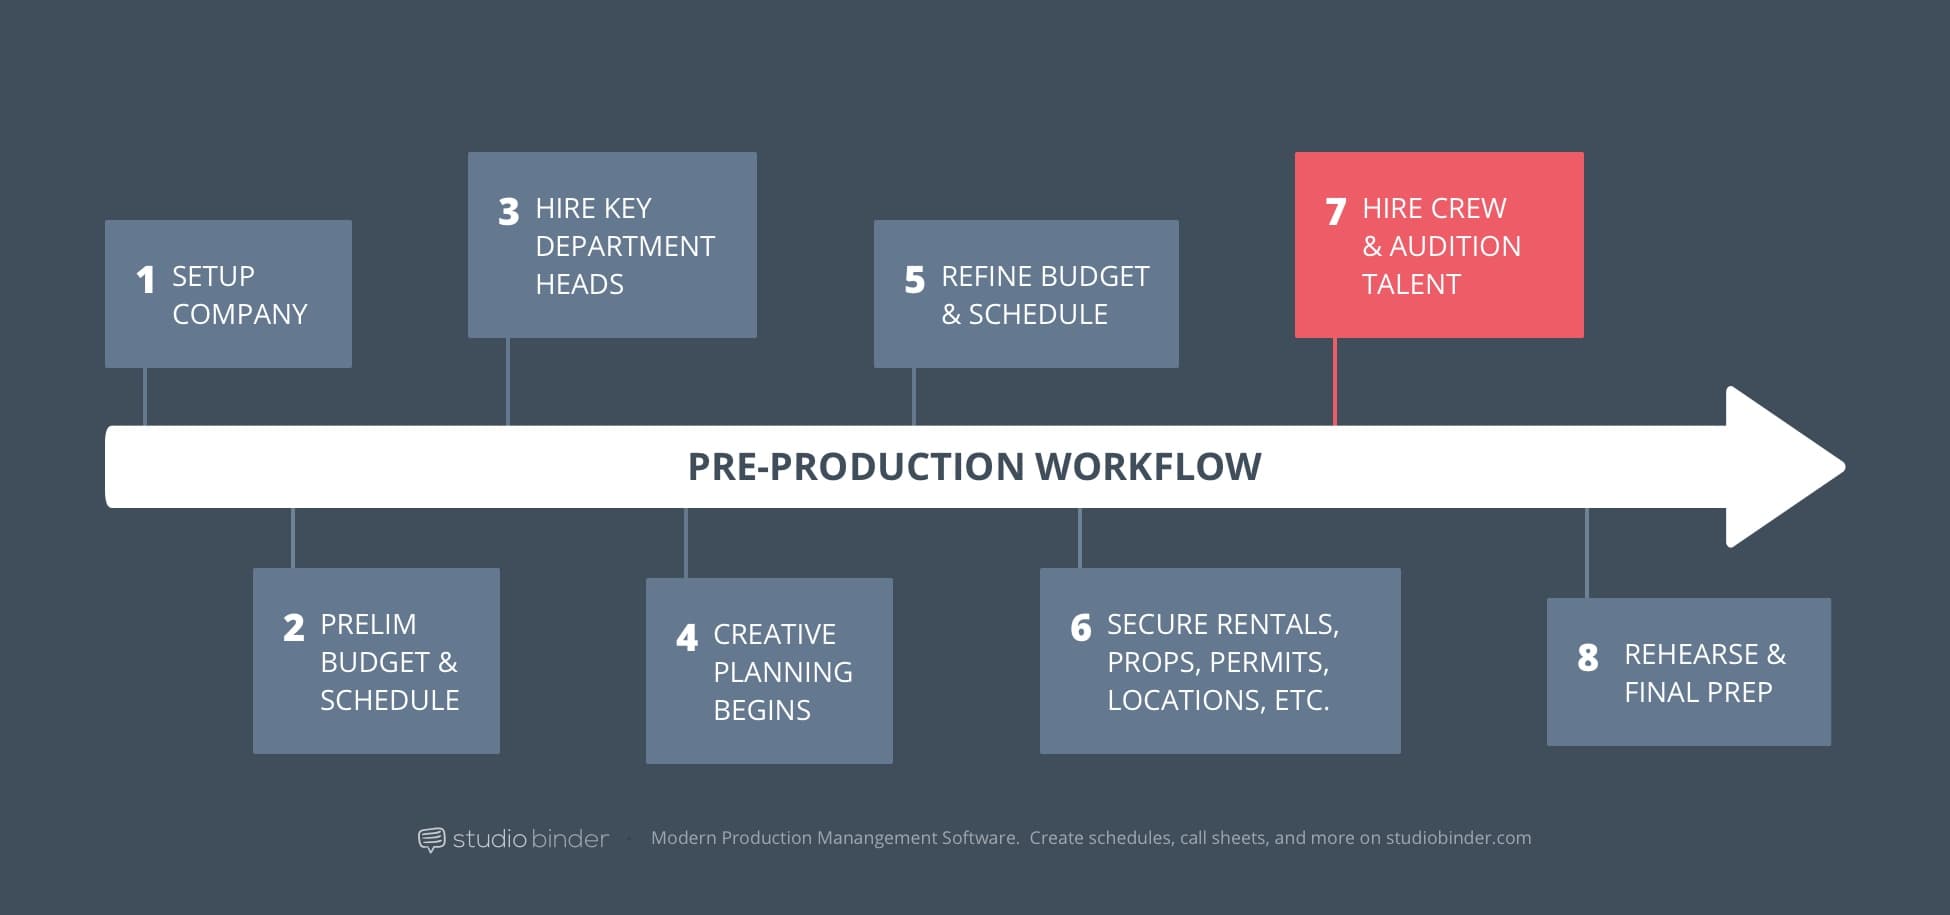 7 - StudioBinder Pre-Production Workflow - Hire Crew and Audience Talent